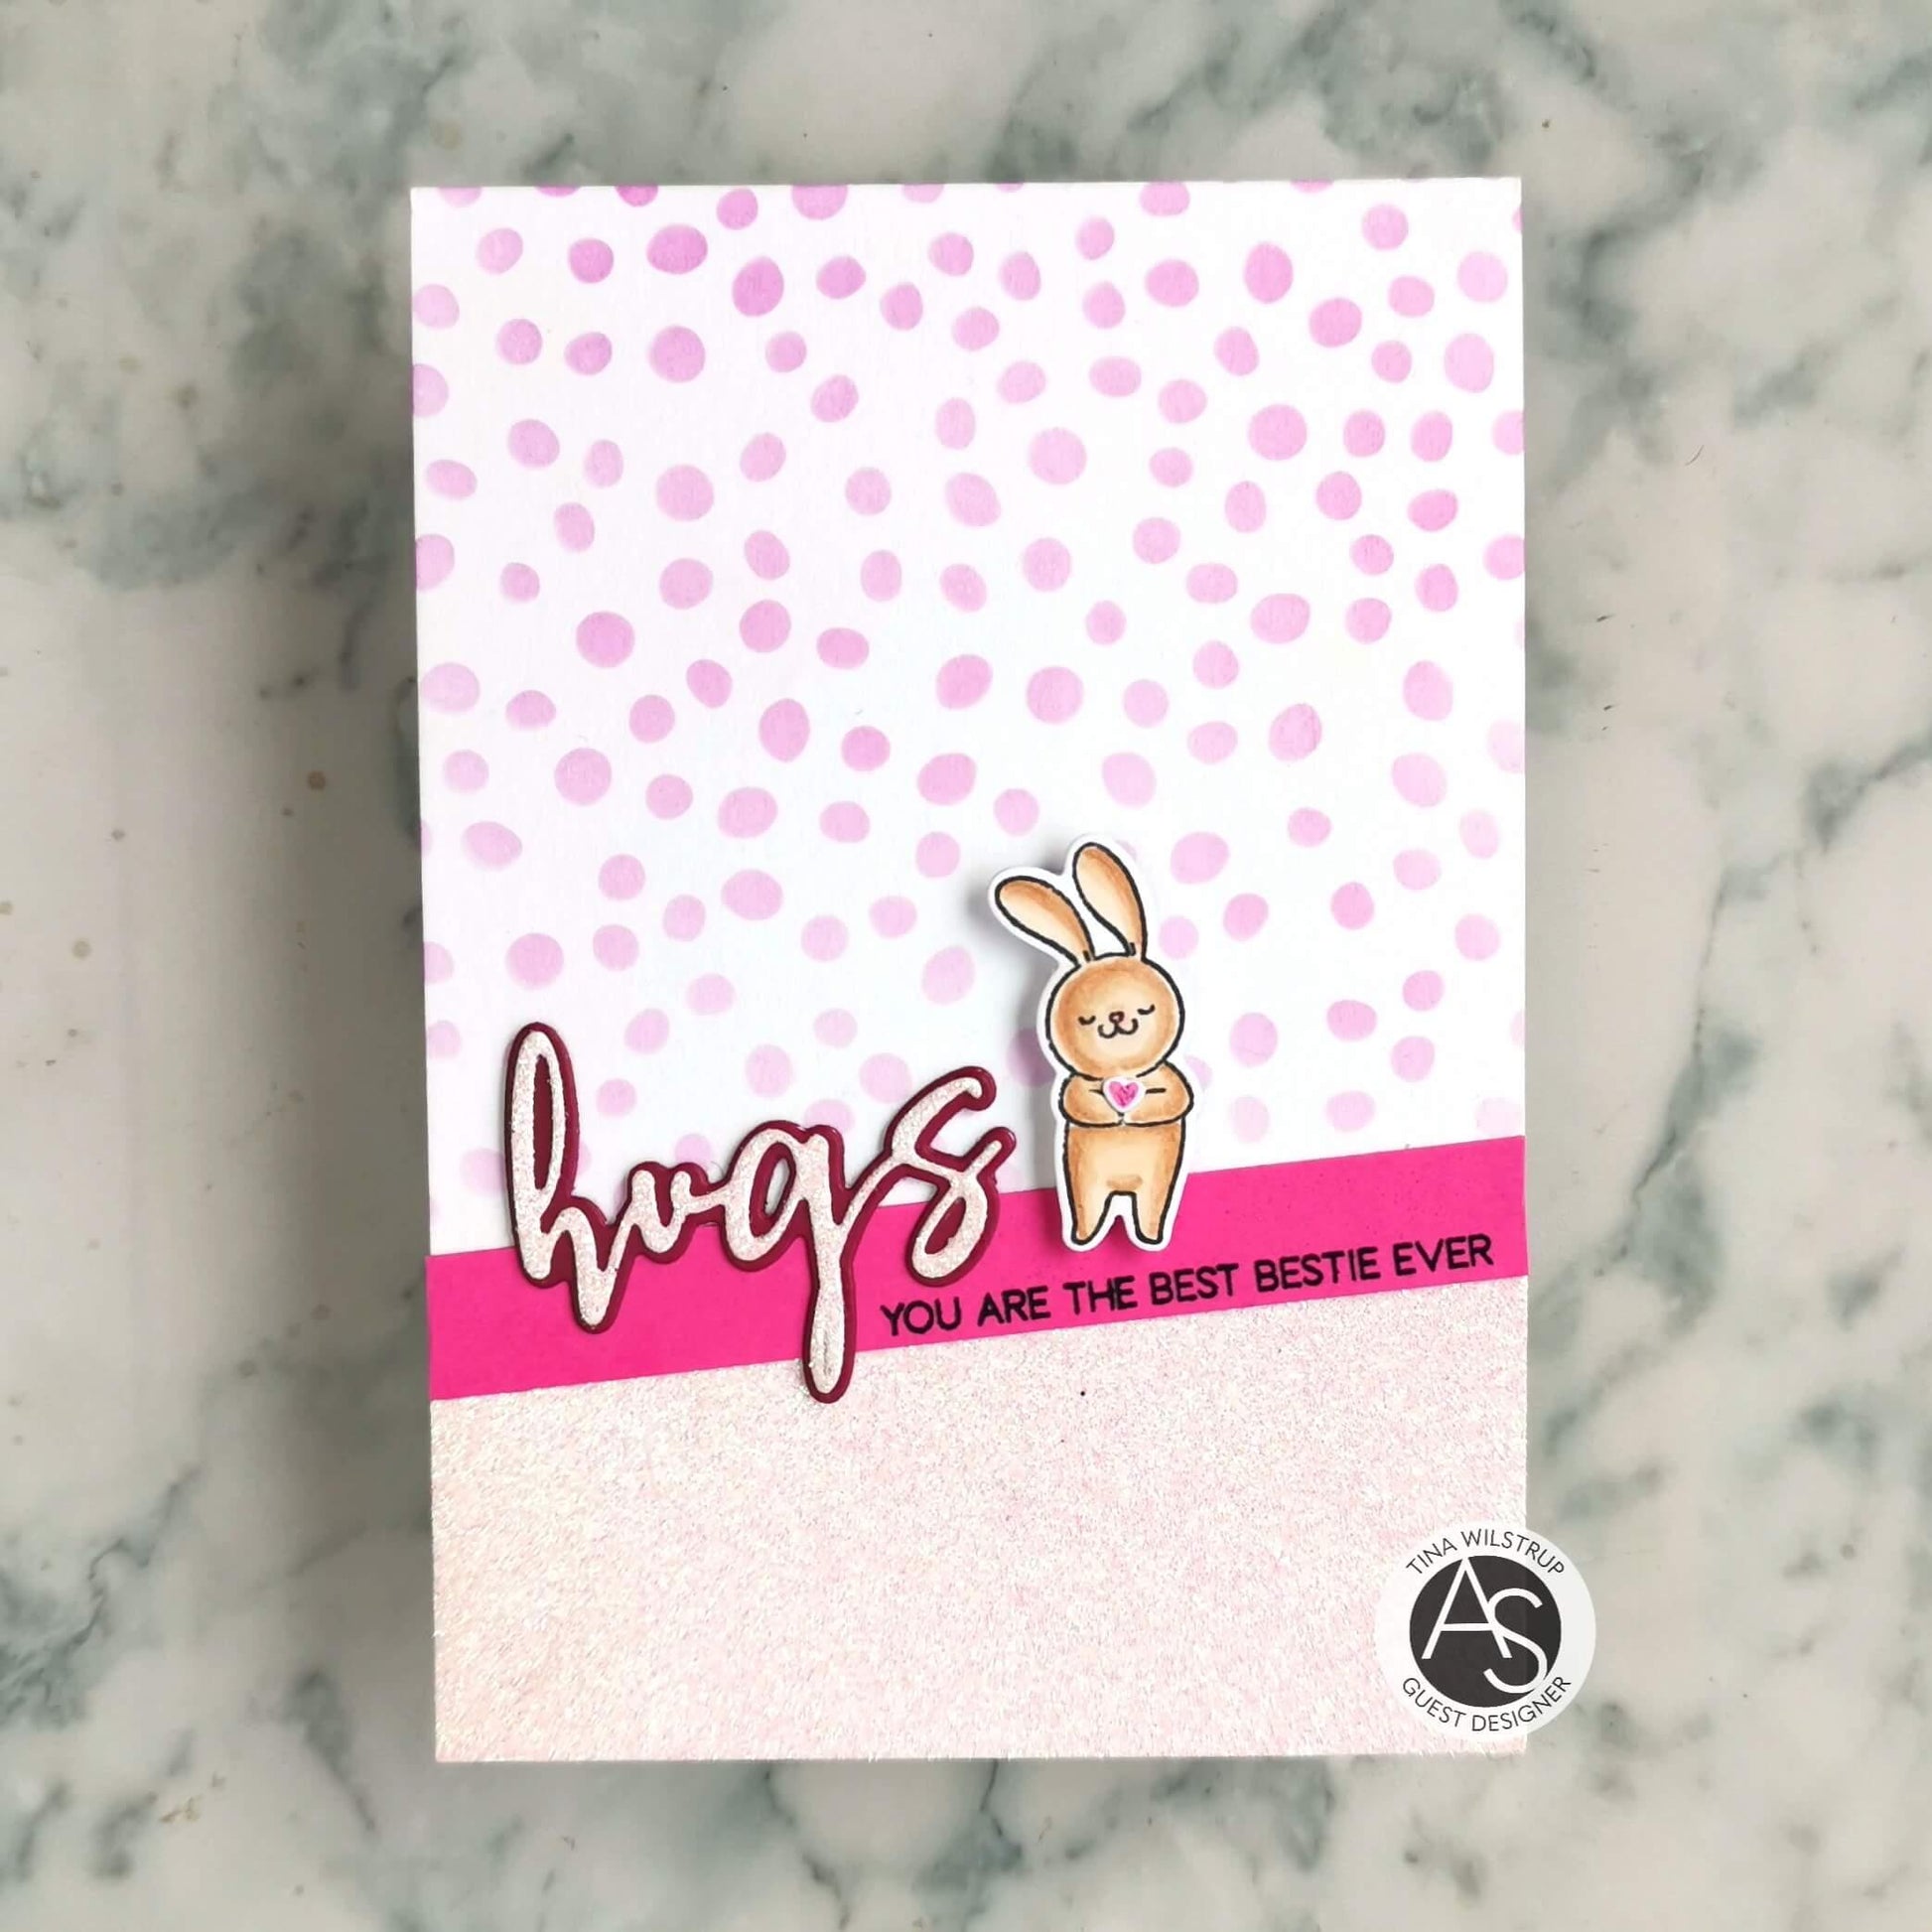 alex-syberia-designs-spring-bunny-stamp-egg-easter-happy-spring-dies-carrot-cardmaking-handmadecards-flowers-colouring-hugs-sentiments